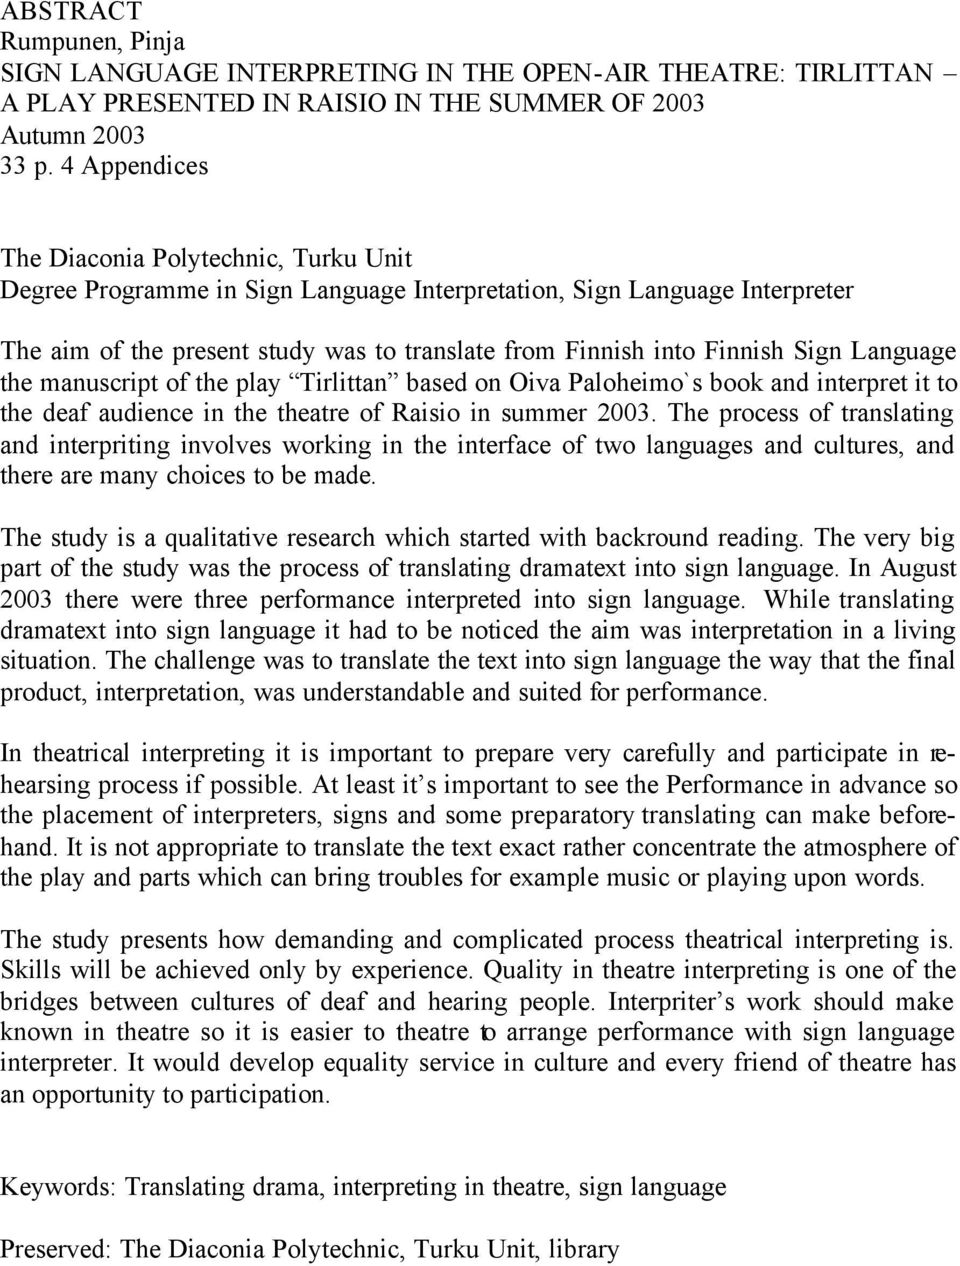 Sign Language the manuscript of the play Tirlittan based on Oiva Paloheimo`s book and interpret it to the deaf audience in the theatre of Raisio in summer 2003.